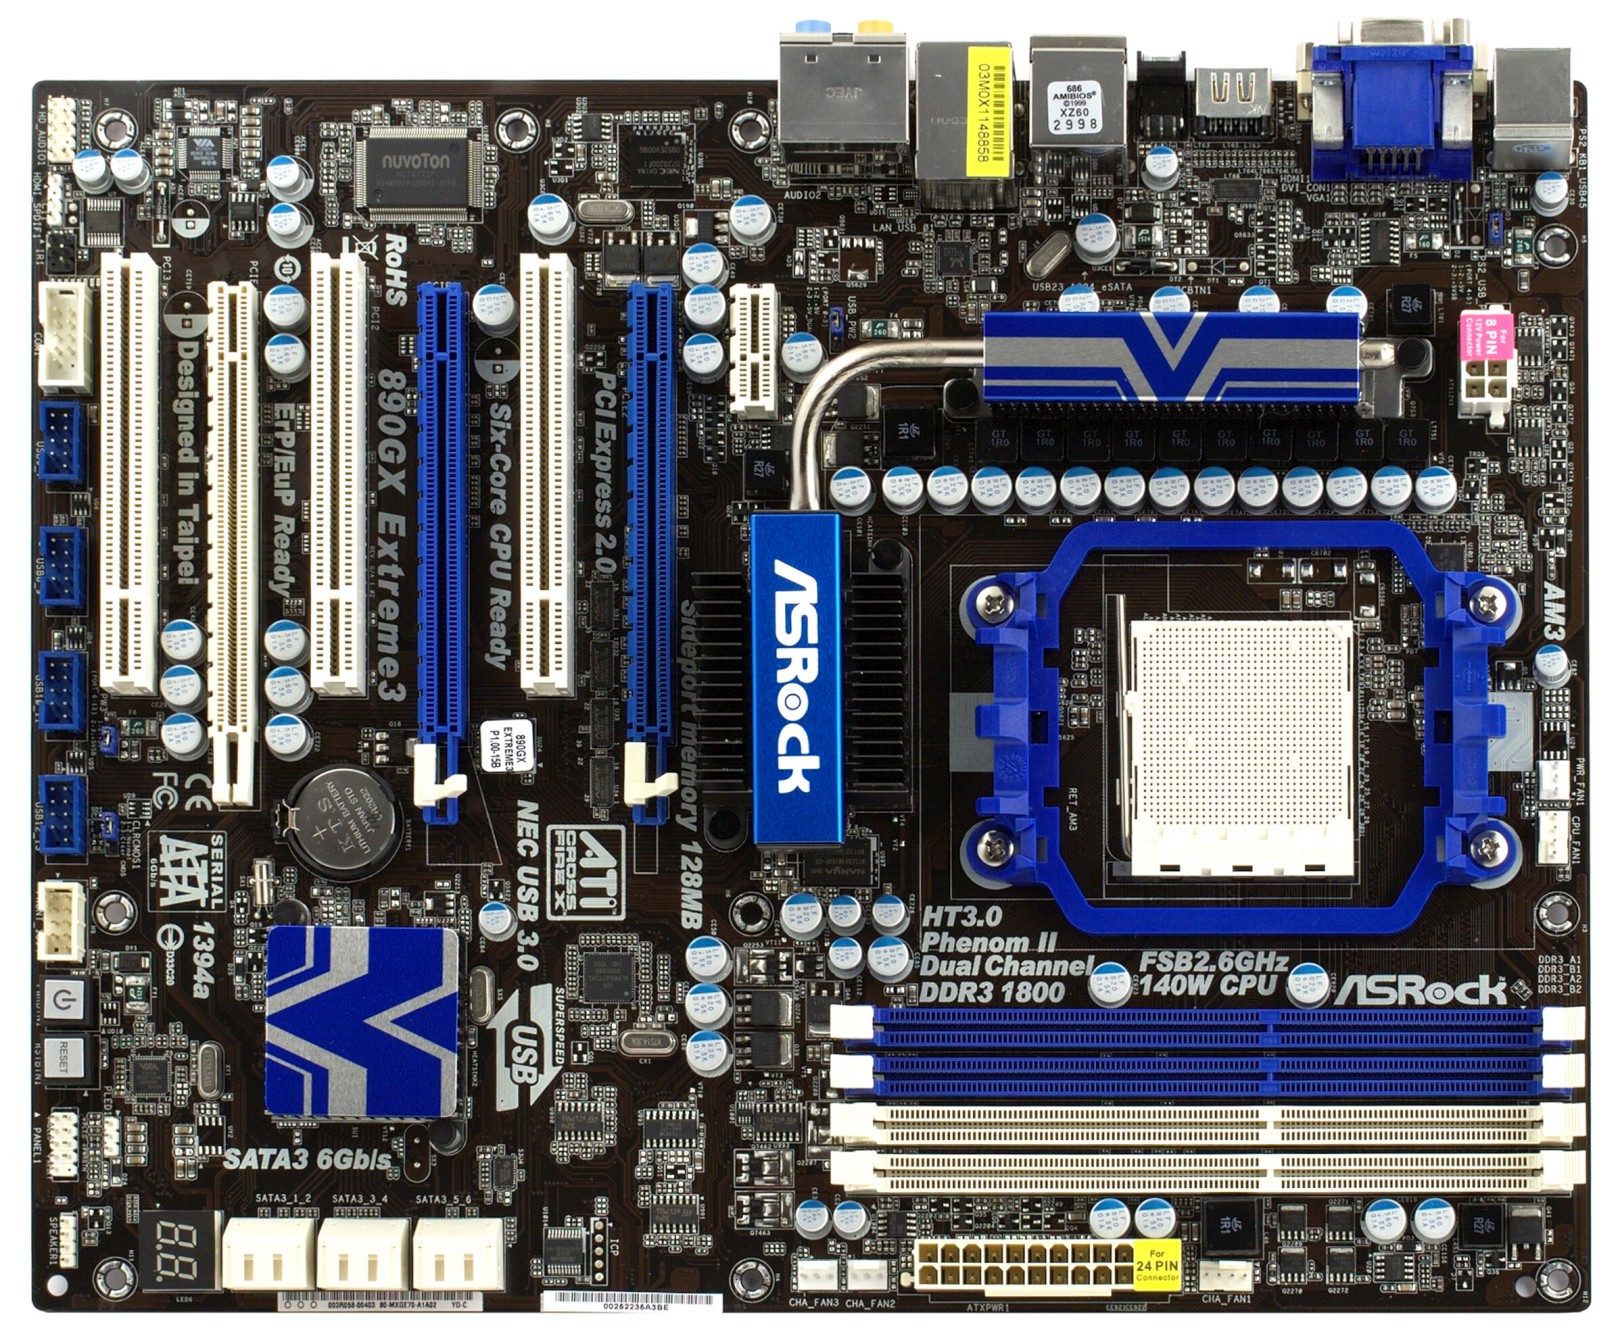 iXBT Labs - ASRock 890GX Extreme3 Motherboard - Page 1 